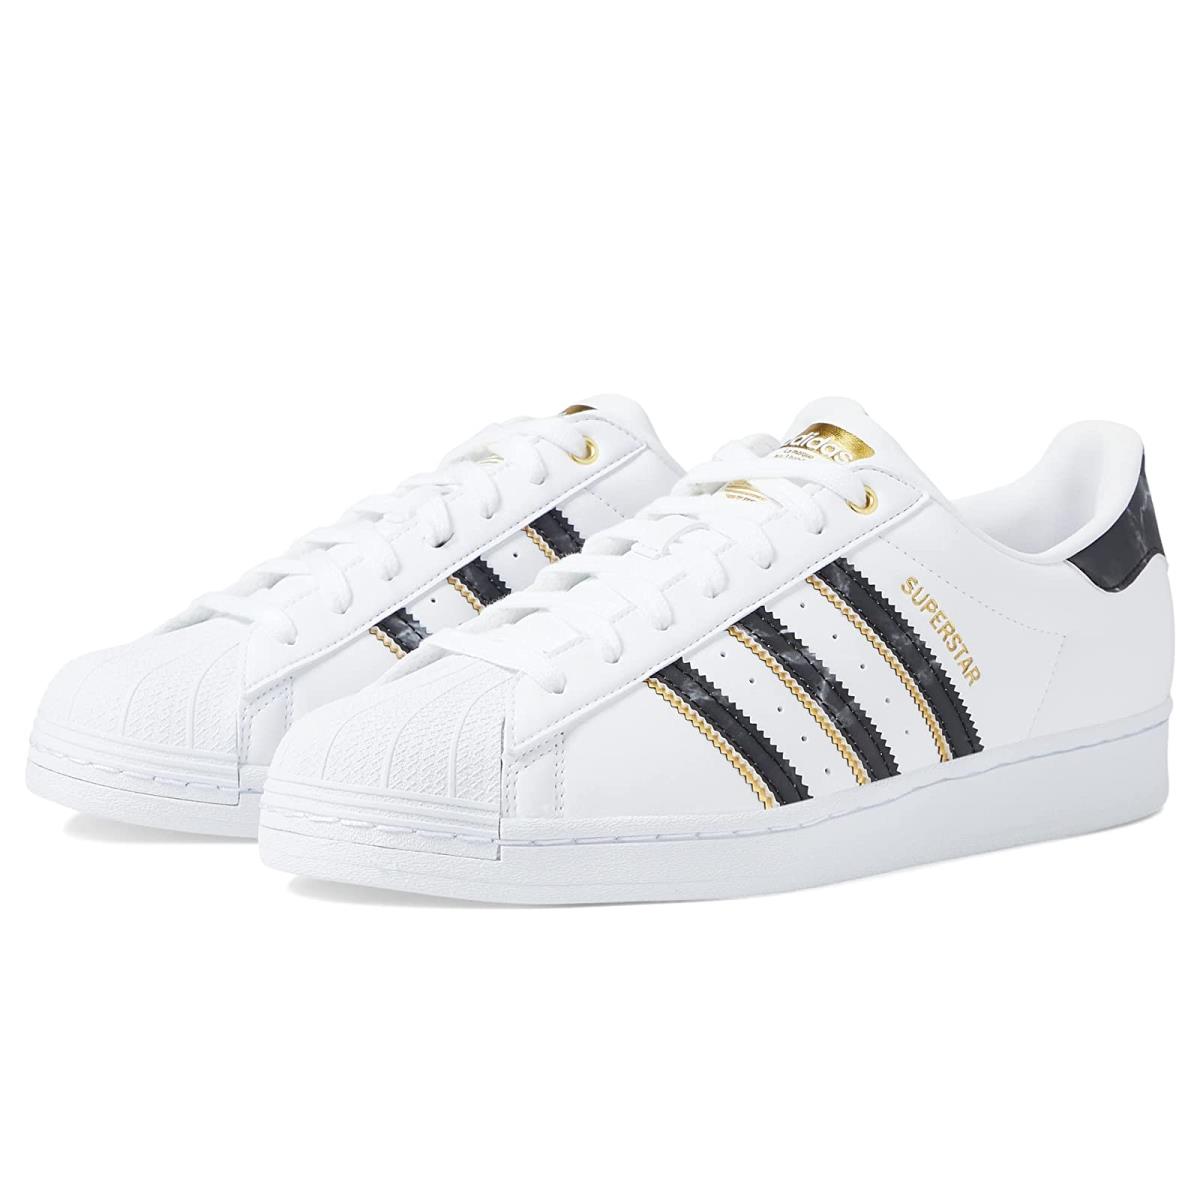 Woman`s Sneakers Athletic Shoes Adidas Originals Superstar W White/Black/Gold Metallic 1